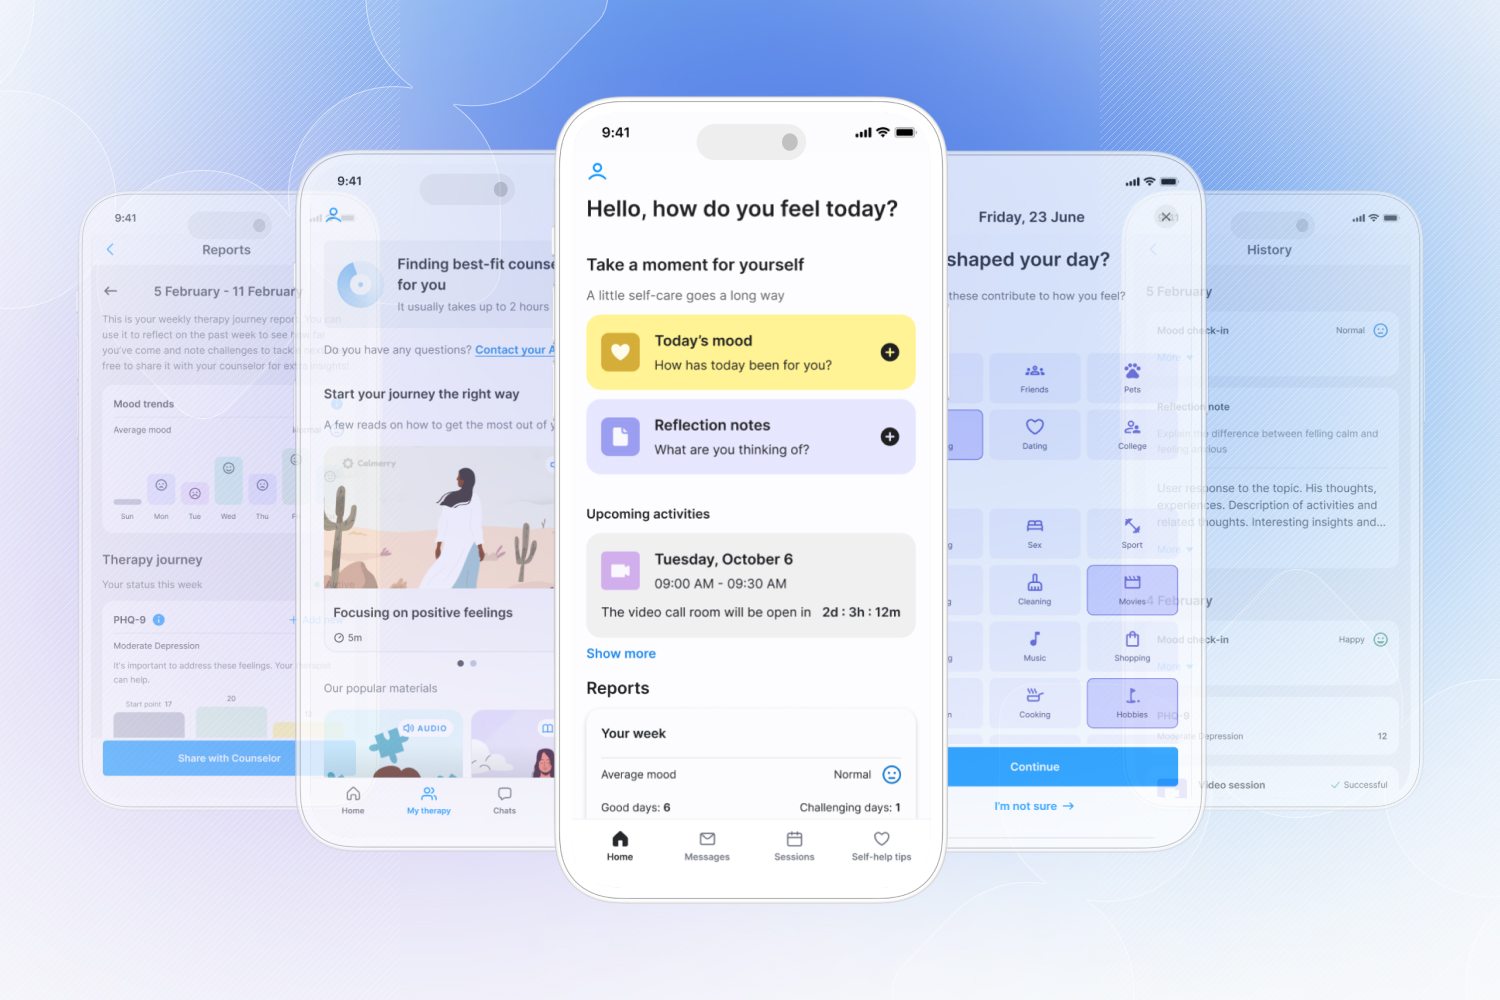 Welcome to the new home screen – your wellness dashboard. There are screenshots from an app to track your mental health.